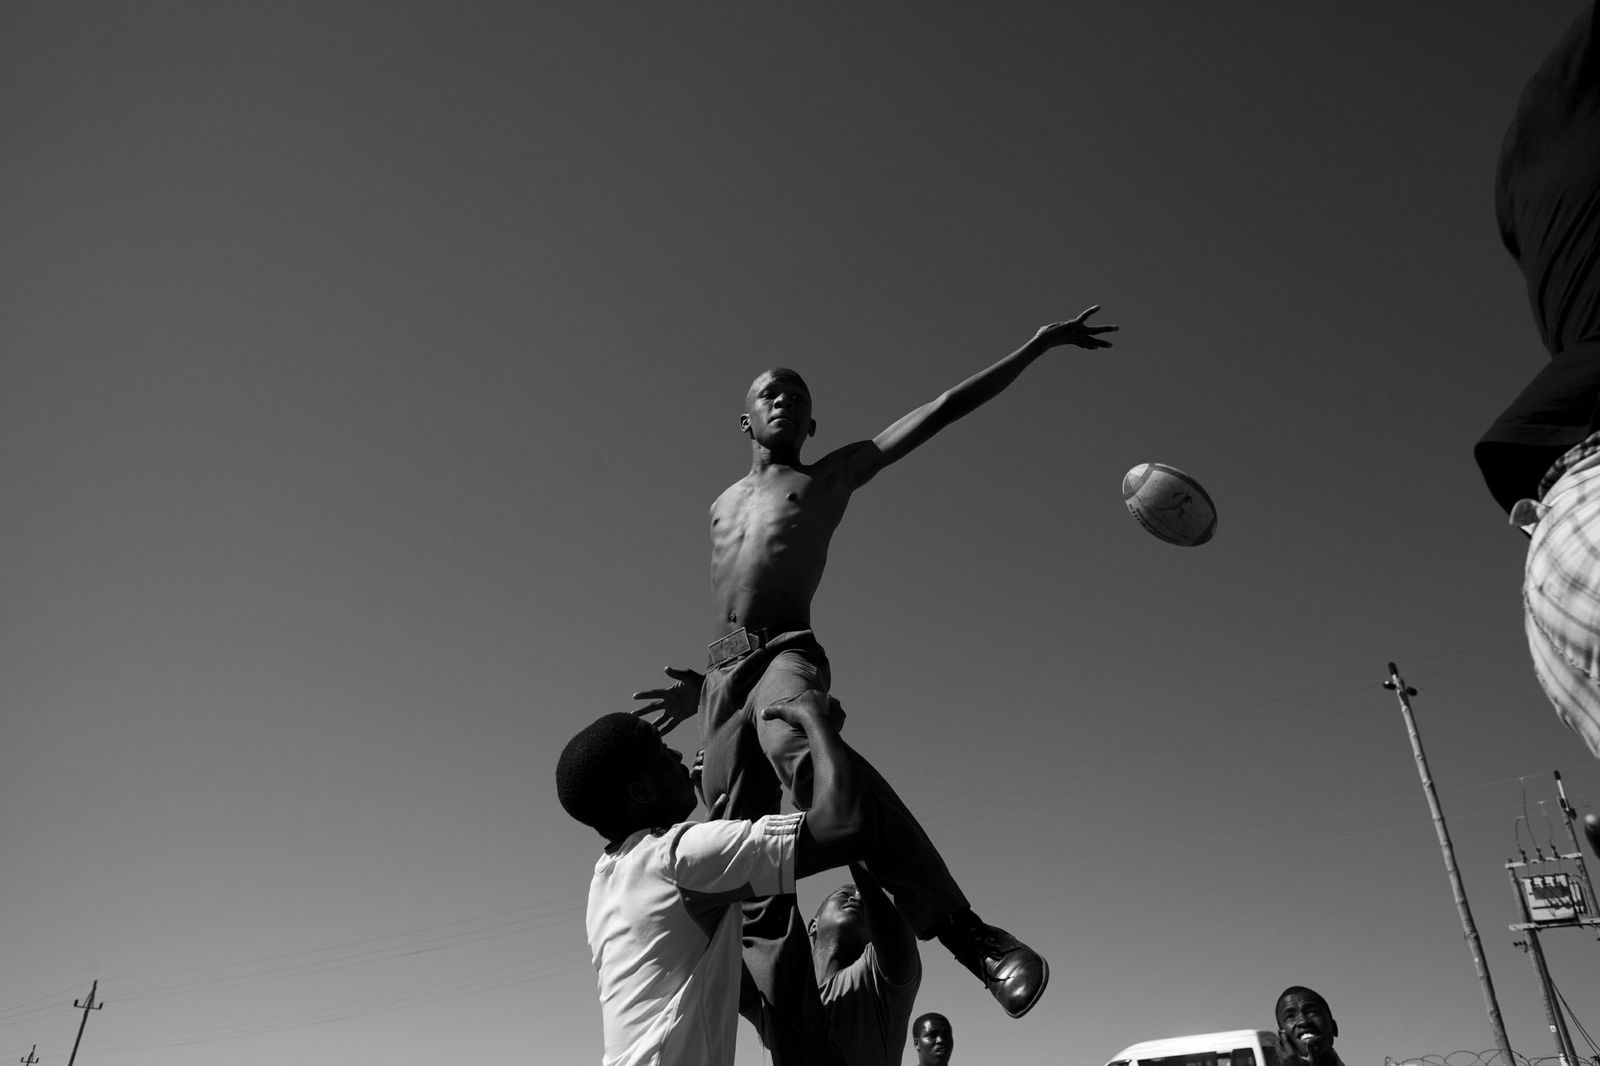 Ndumiso Gaga, 19, practices rugby with classmates at Iqhayiya Senior Secondary School, in Khayelitsha, Cape Town. “It’s hard to grow up here, because there are many things that are bad,” says Gaga.